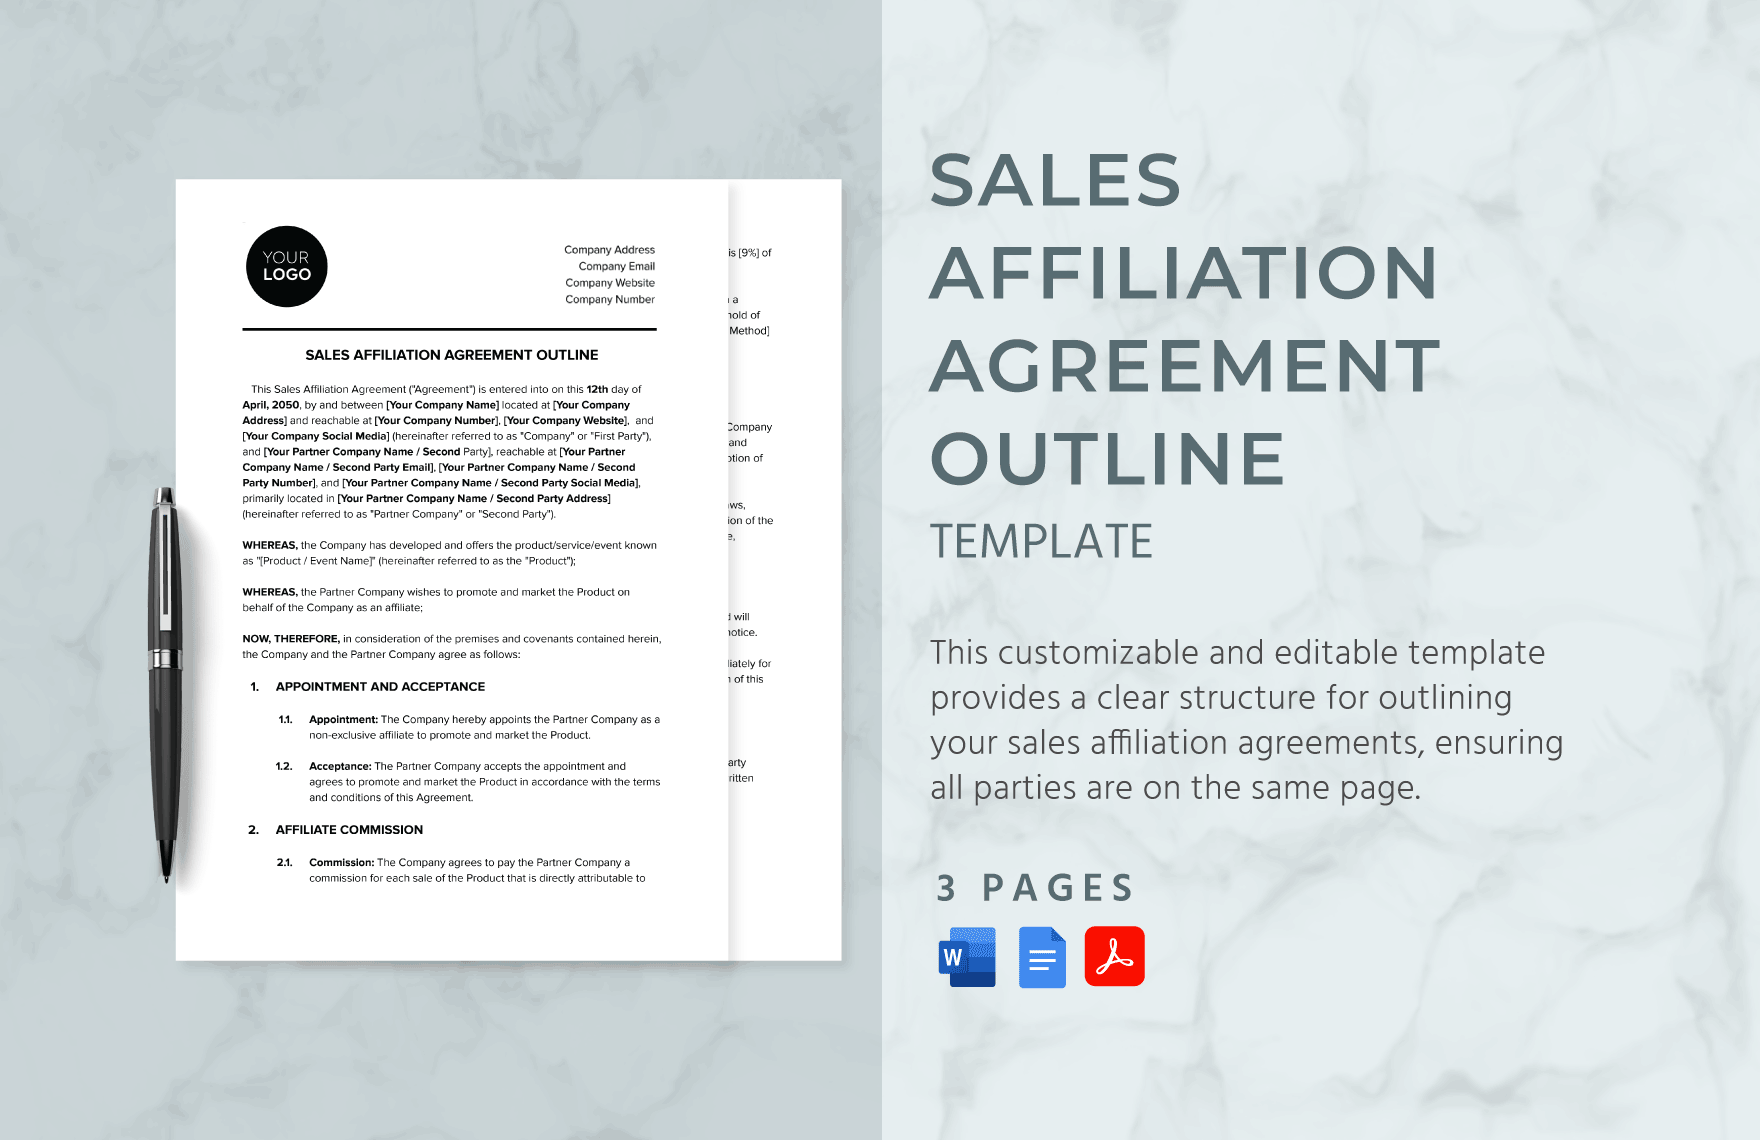 Sales Affiliation Agreement Outline Template in Word, Google Docs, PDF